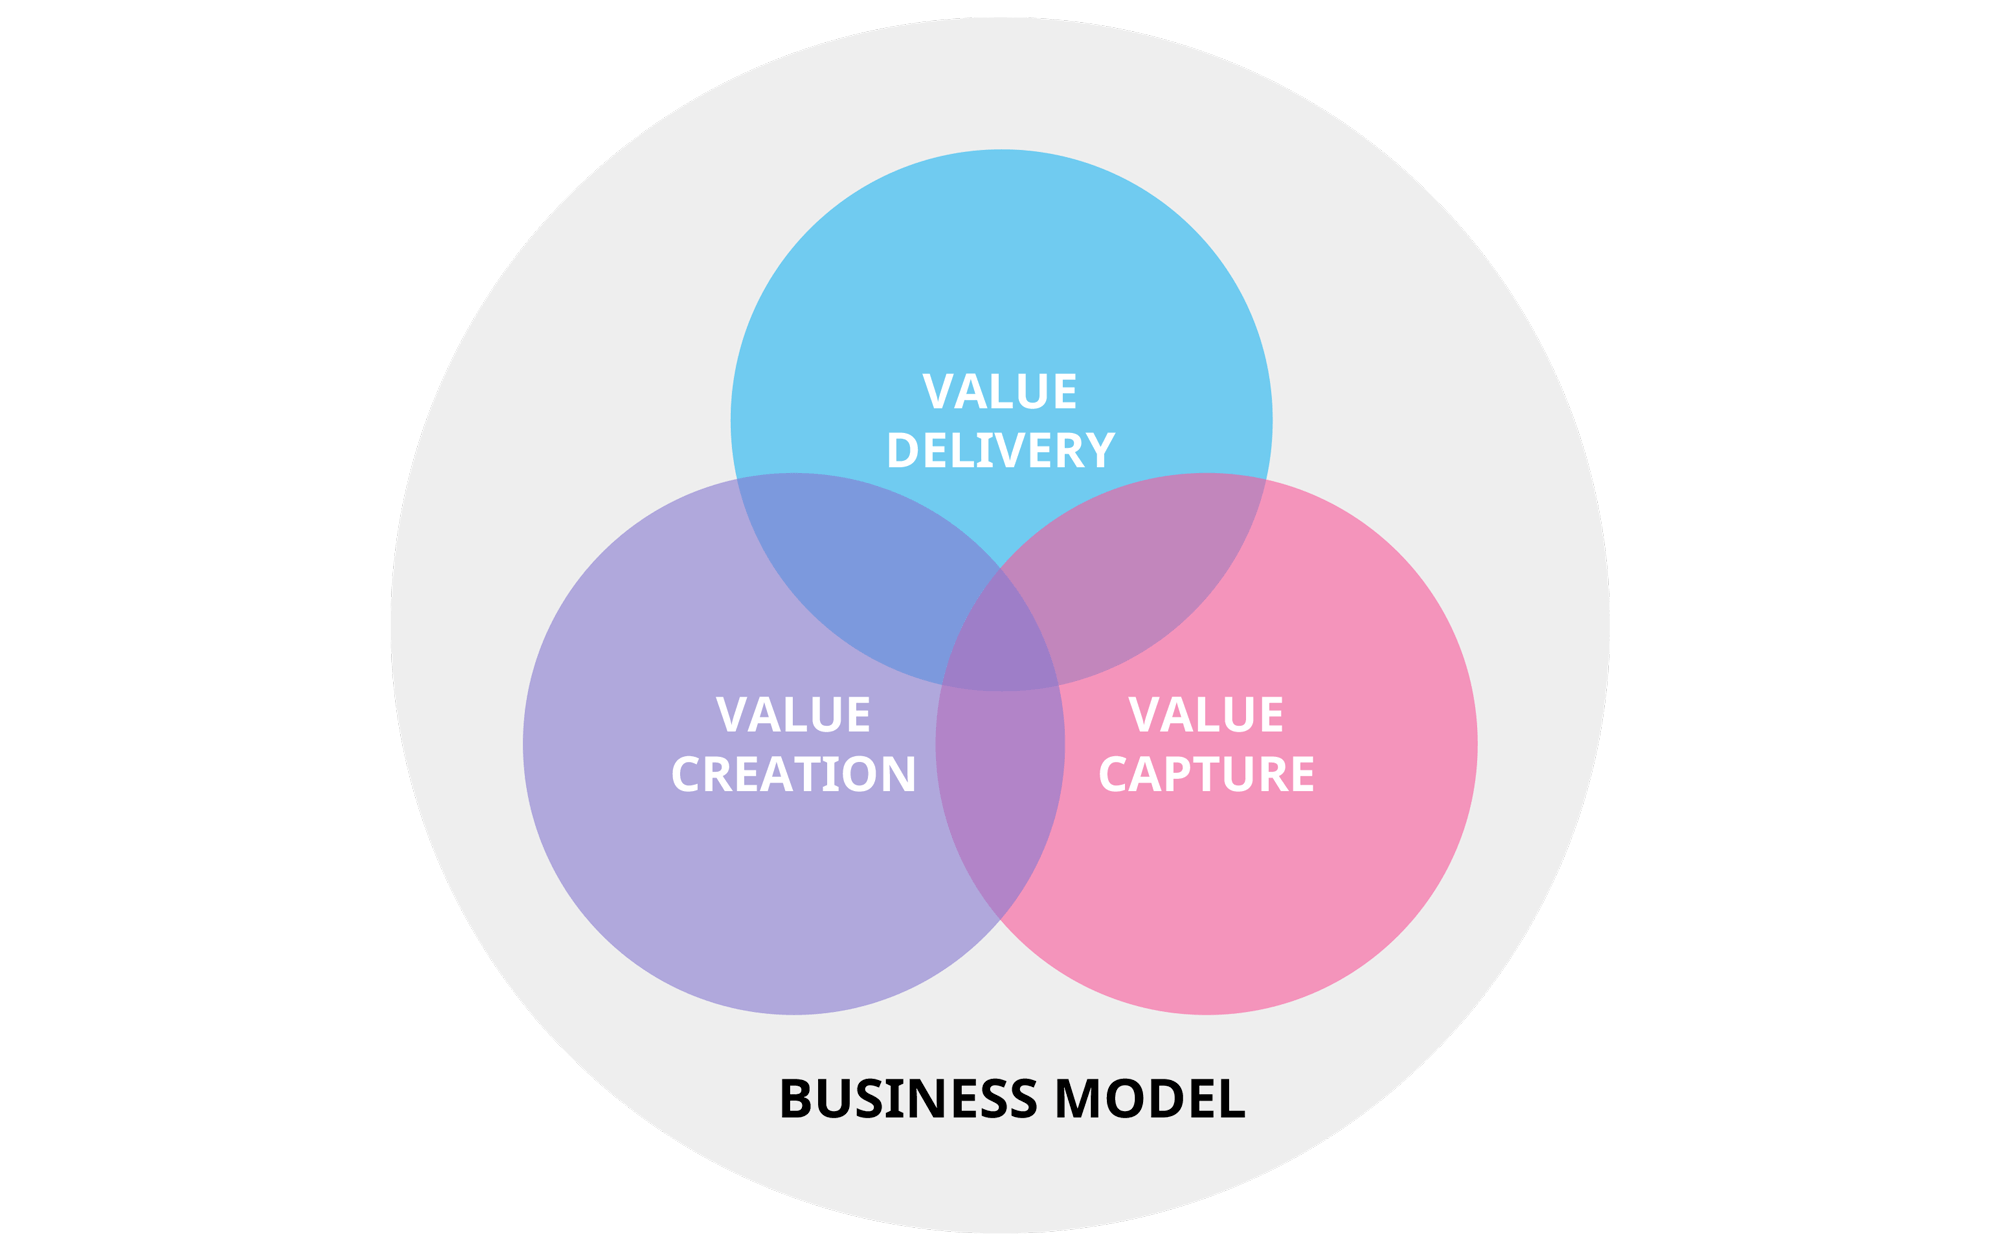 What is a business model?